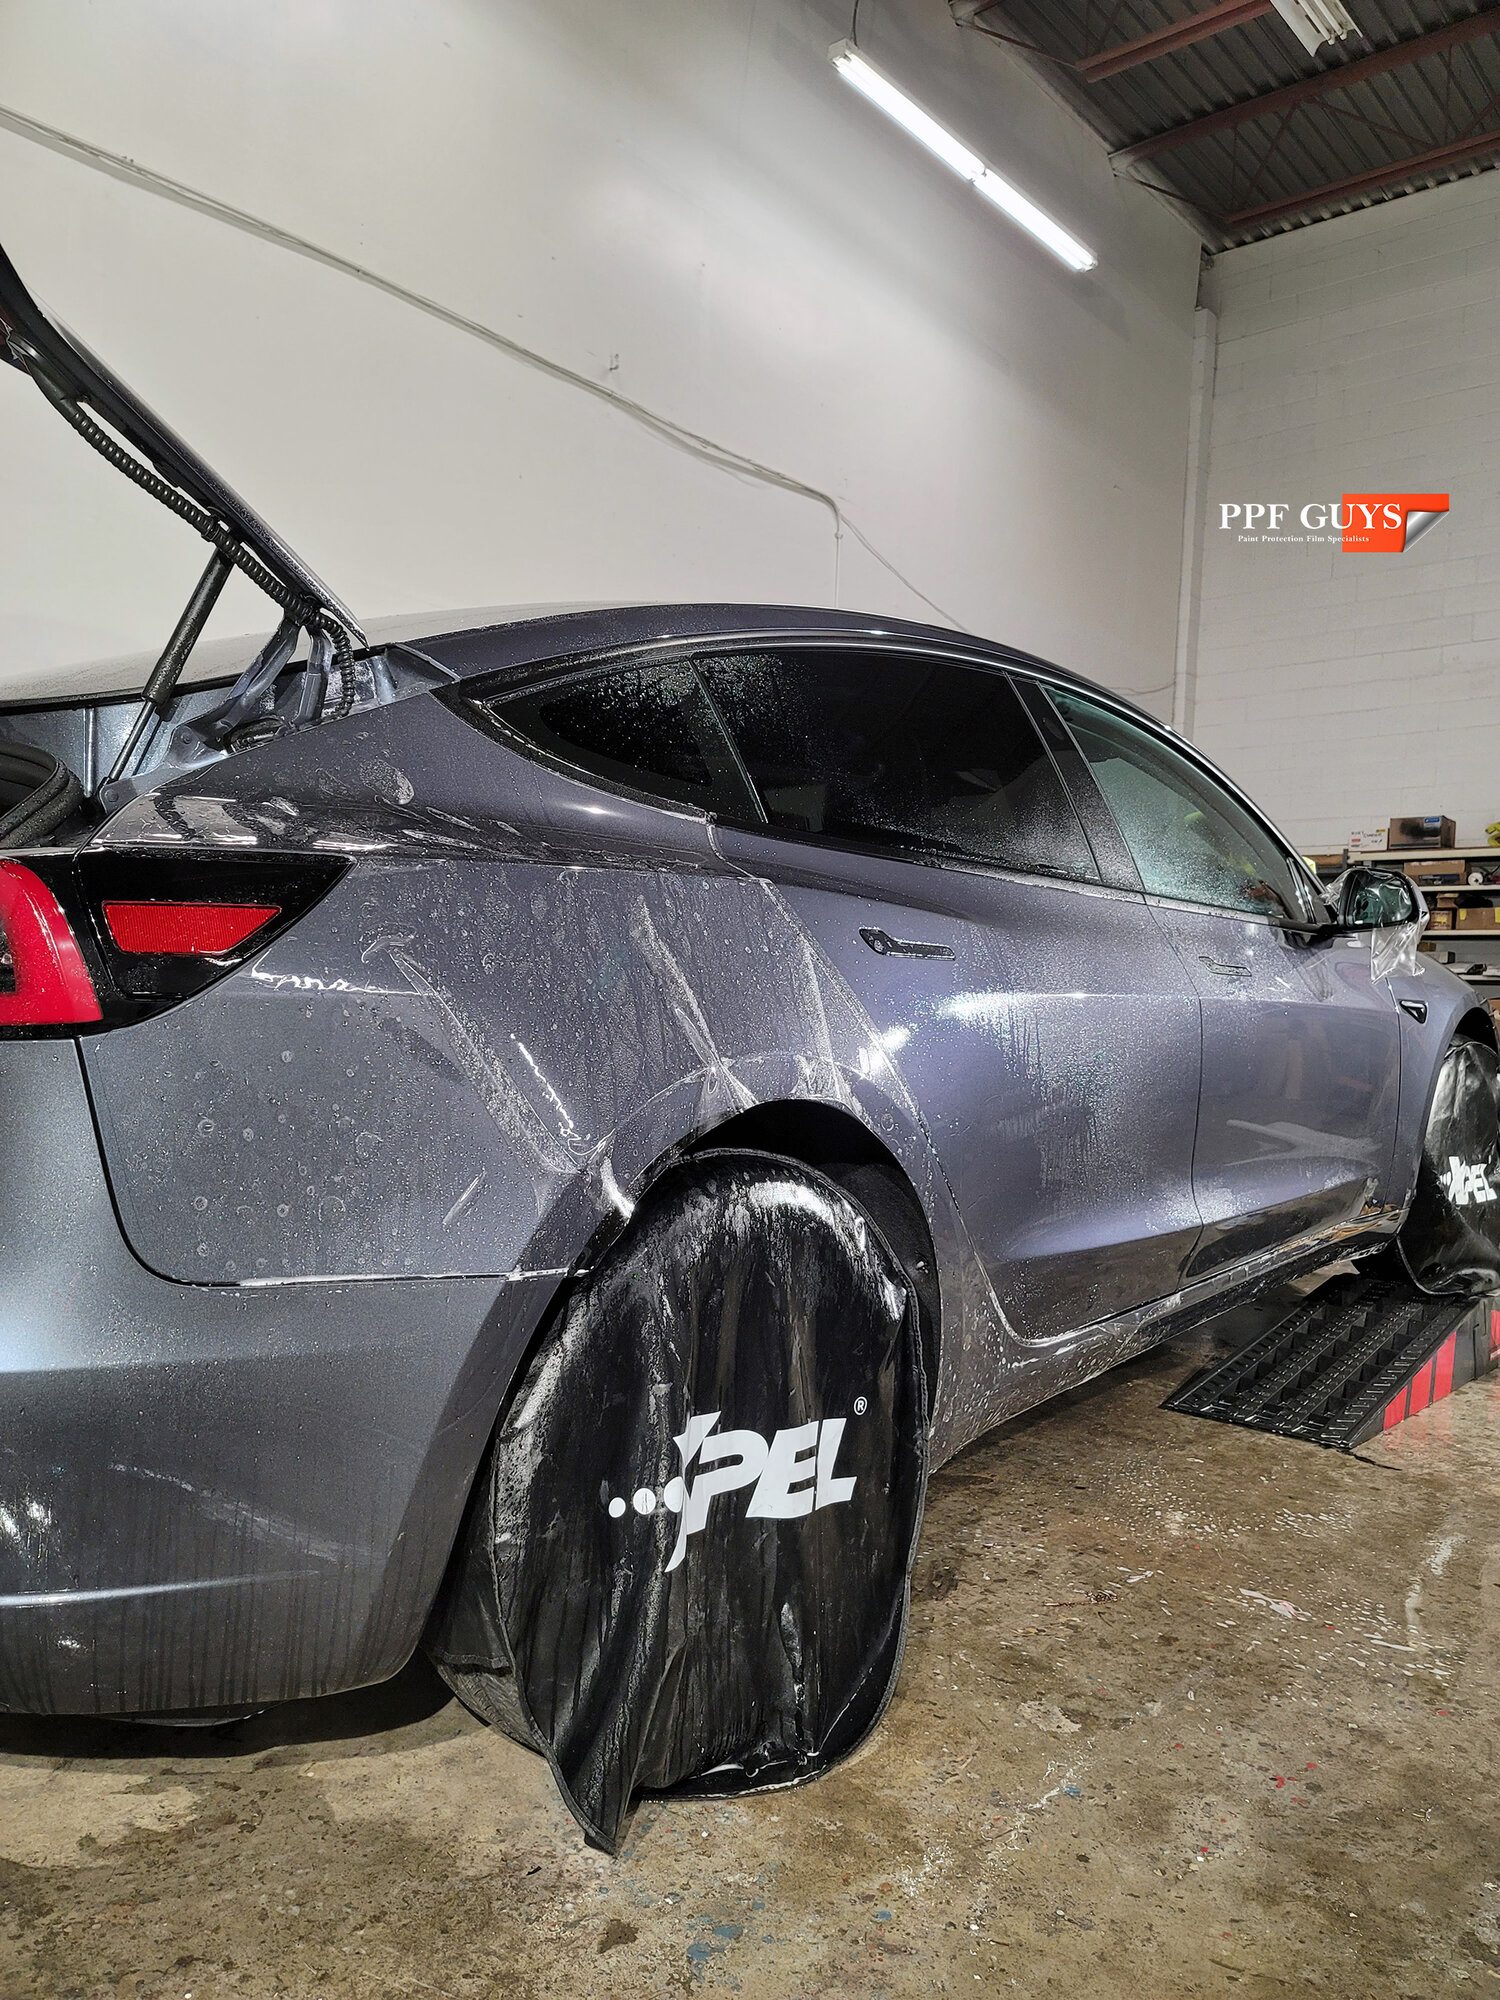 PPF Guys Model 3 Silver Front end and rear fenders (16).jpg